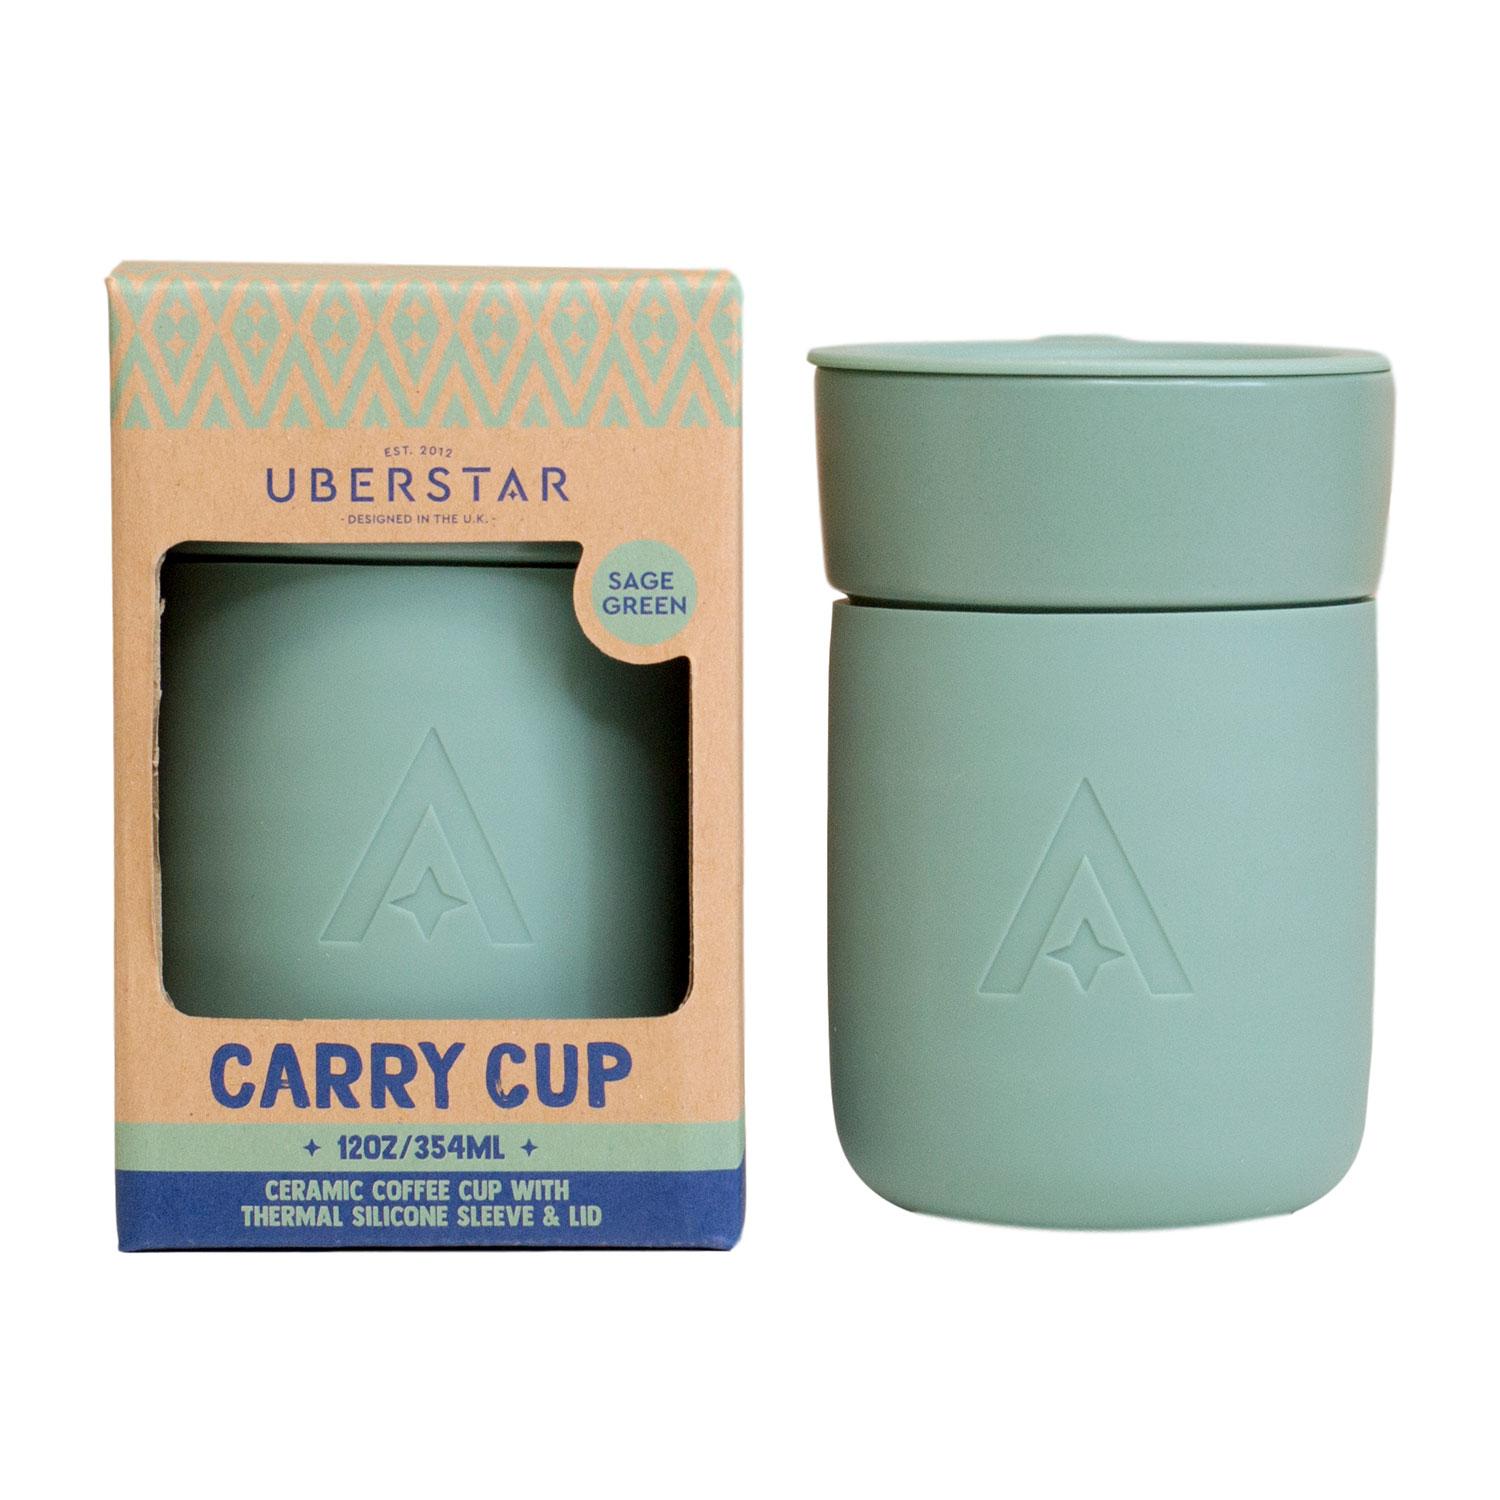 Carry Cup - The Universal Travel Mug by Uberstar (Sage Green)